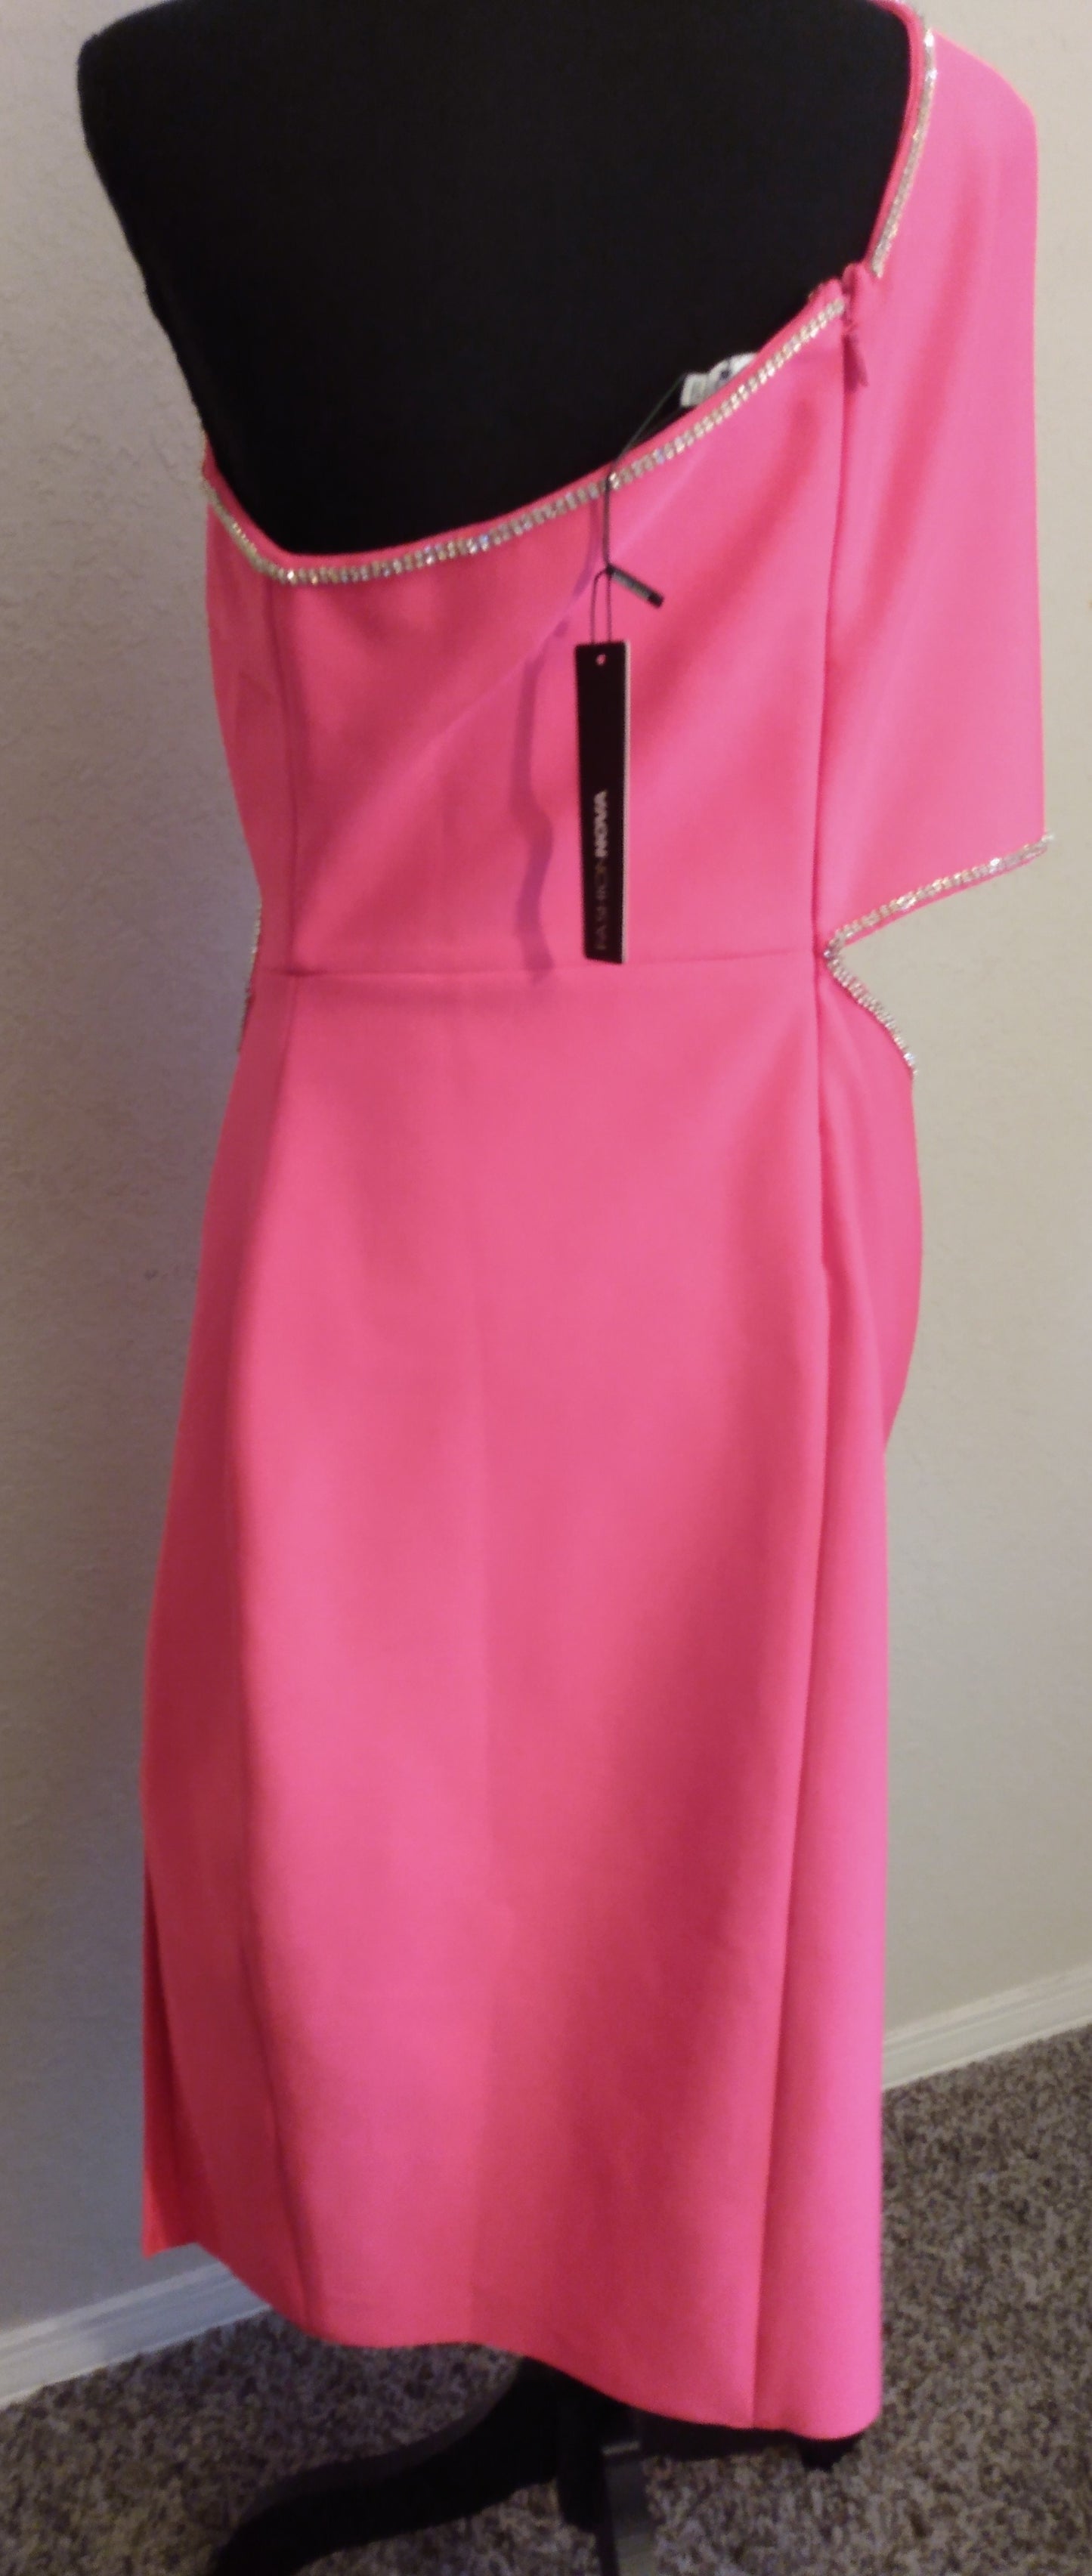 After Five Pink Rhinestone Accent Dress